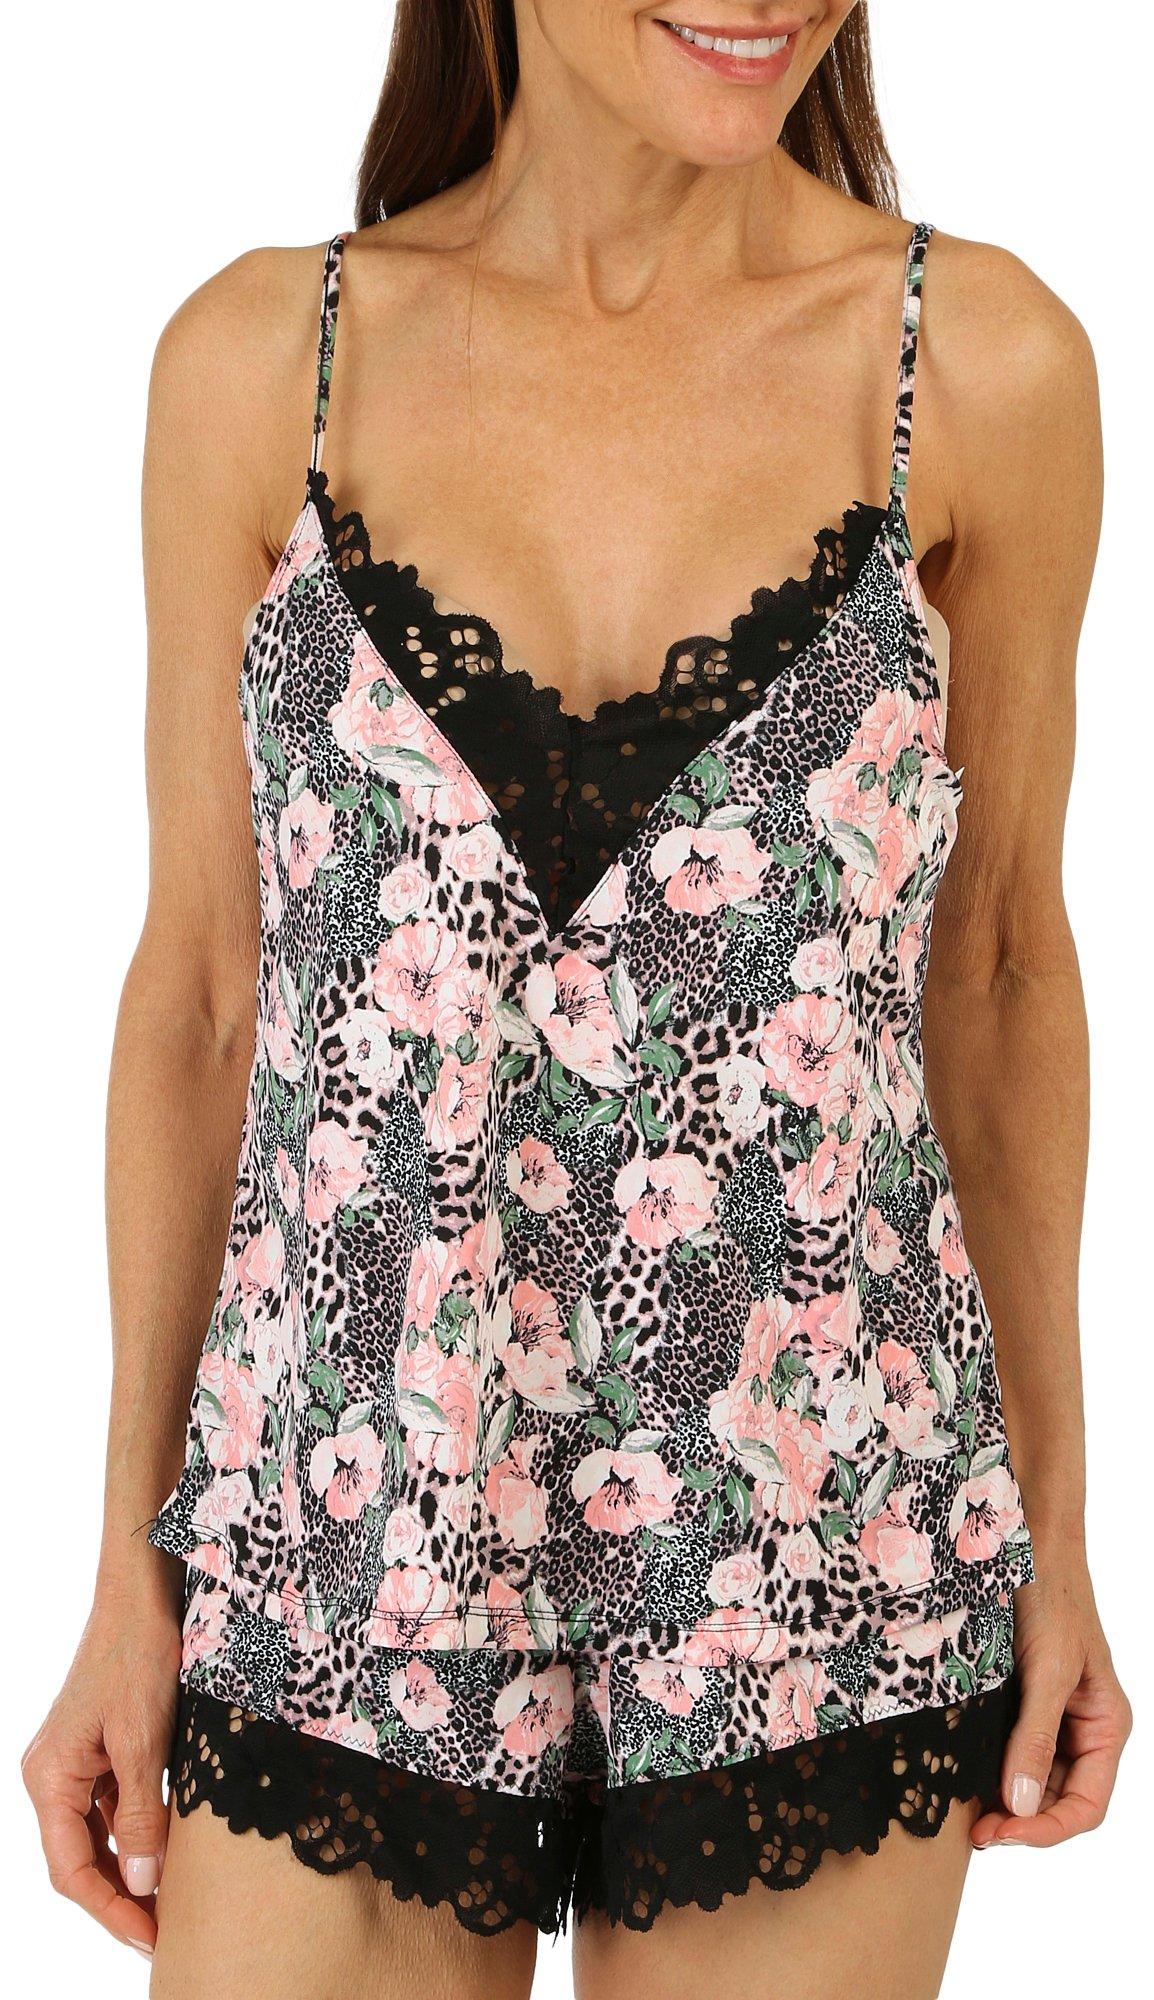 Jessica Simpson Womens 2-Pc. Lace Cami & Shorts